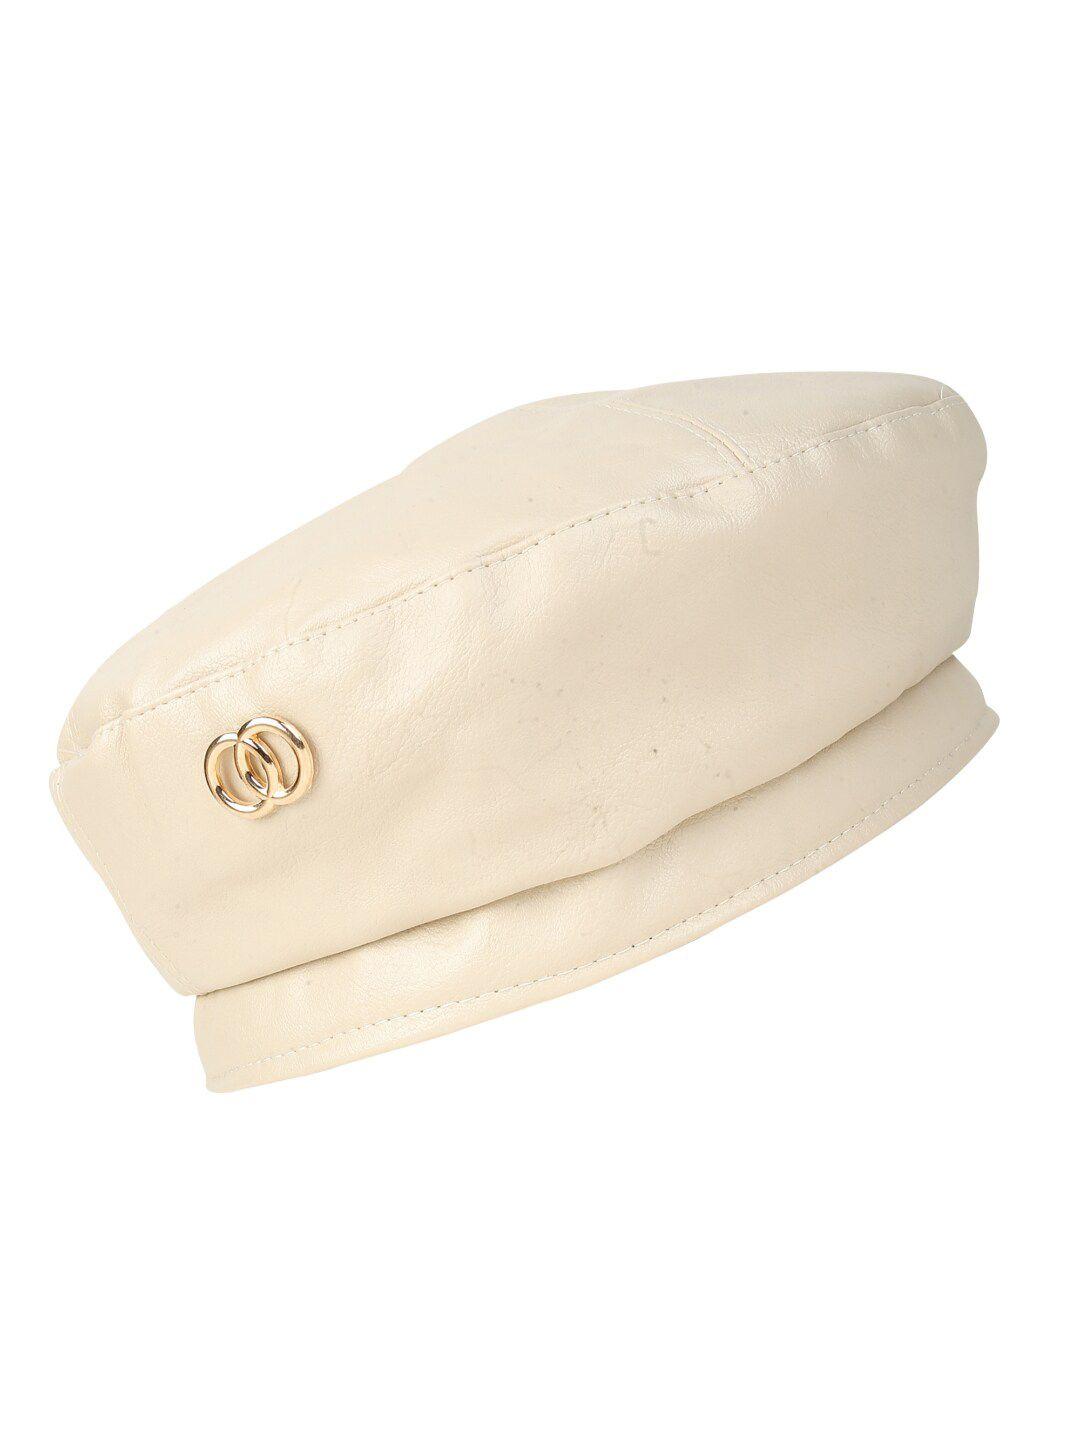 isweven unisex cream-coloured & gold-toned ascot beret french cap